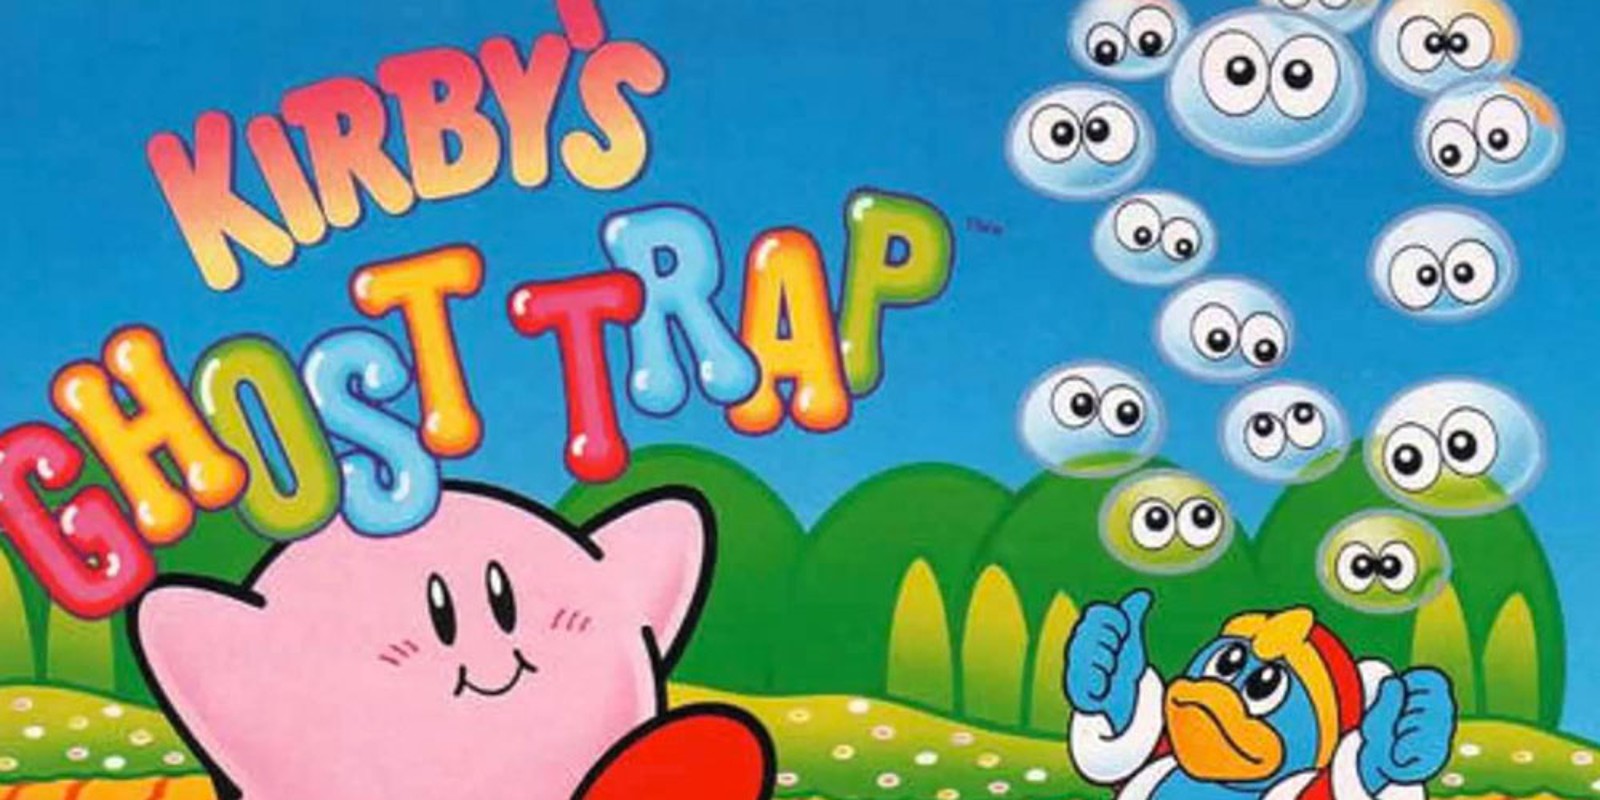 Kirby's Ghost Trap™